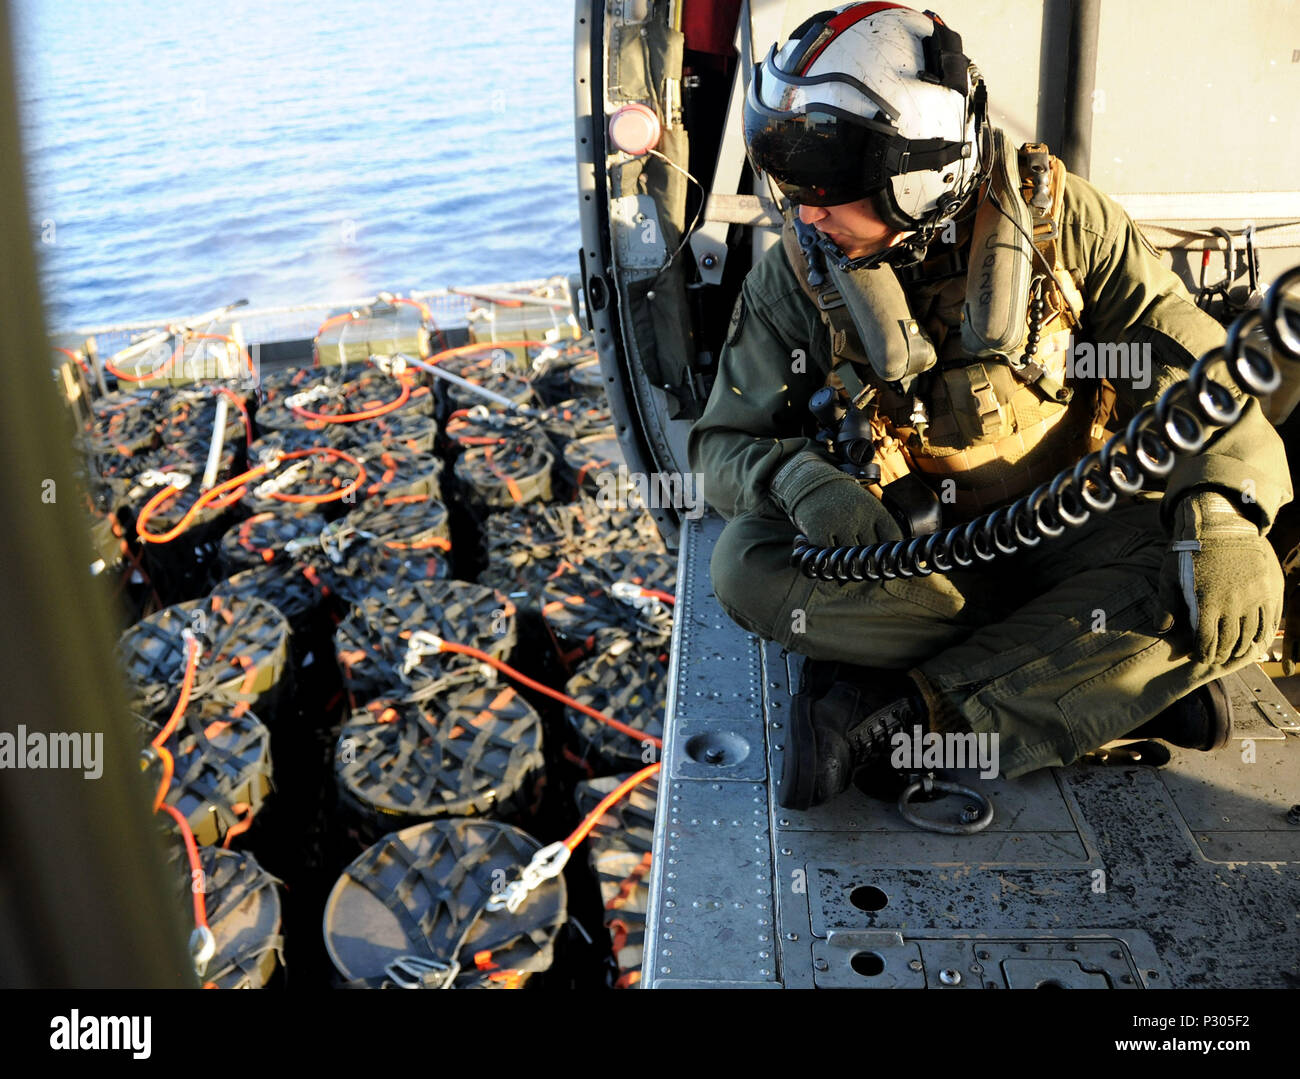 160816-N-XI307-305 ATLANTIC OCEAN (Aug. 16, 2016) Naval Air Crewman (Helicopter) 1st Class Michael Gionet coordinates the pick-up of ammunition during a vertical replenishment with the Military Sealift Command dry cargo and ammunition ship USNS Robert E. Peary (T-AKE 5) aboard an MH-60S helicopter attached to the “Tridents” of Helicopter Sea Combat Squadron (HSC) 9. USS George H.W. Bush (CVN 77) took on 4 million pounds of live ammunition during the underway and vertical replenishment. GHWB is underway conducting training and qualifications in preparation for a 2017 deployment. (U.S. Navy phot Stock Photo